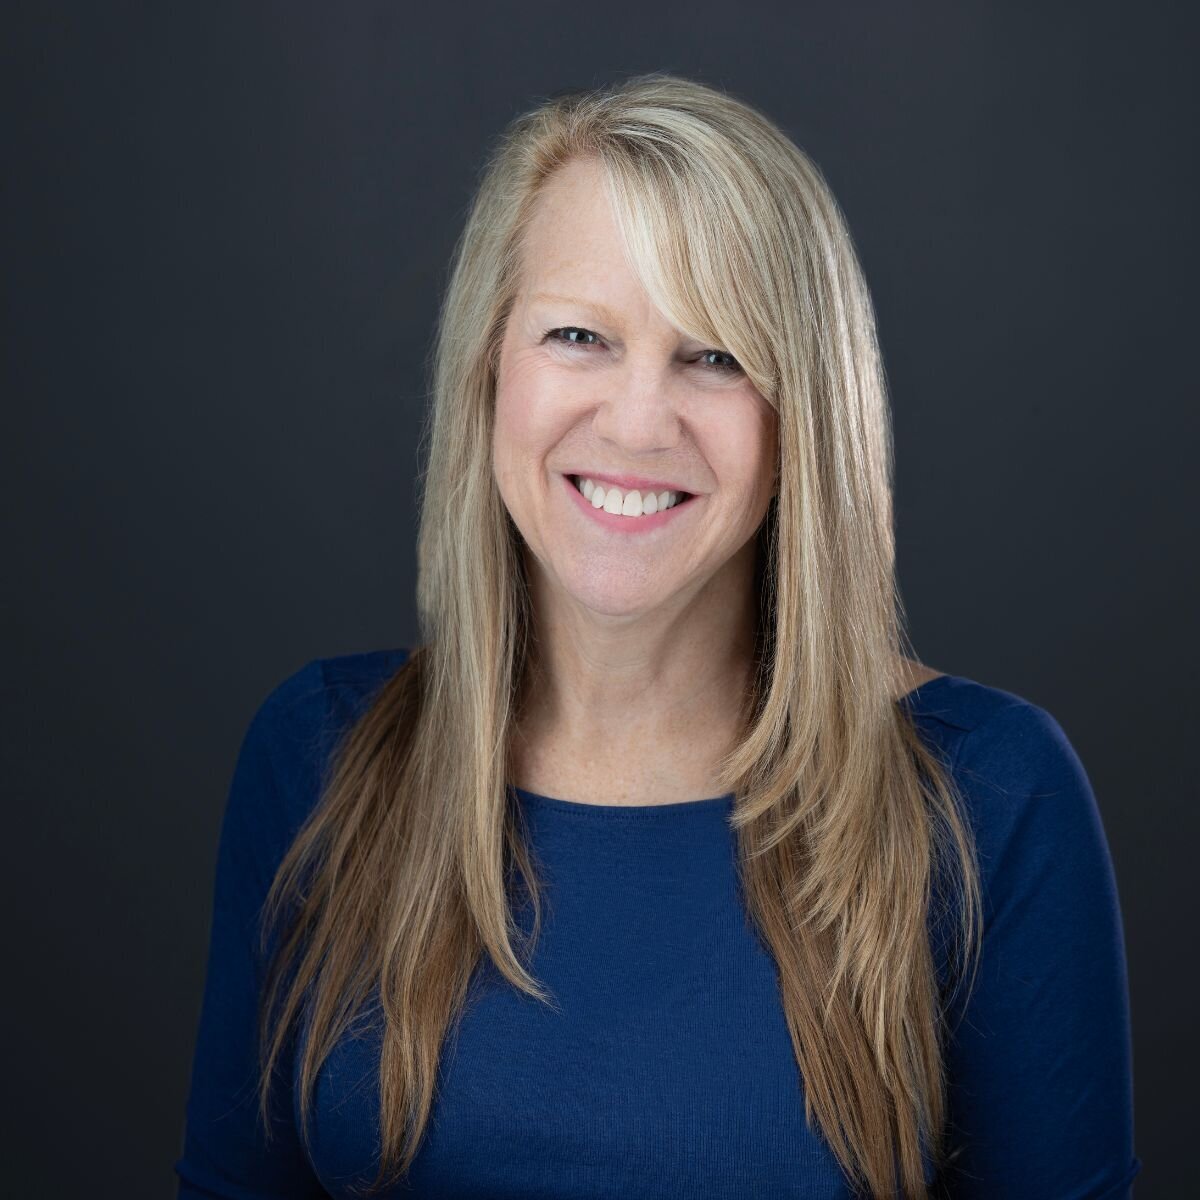 A headshot with a dark grey background of a woman with blond hair and smiling big at the camera. She is wearing a blue shirt and projecting confidence and approachability. Photo by sacramento headshot photographer, philippe studio pro.